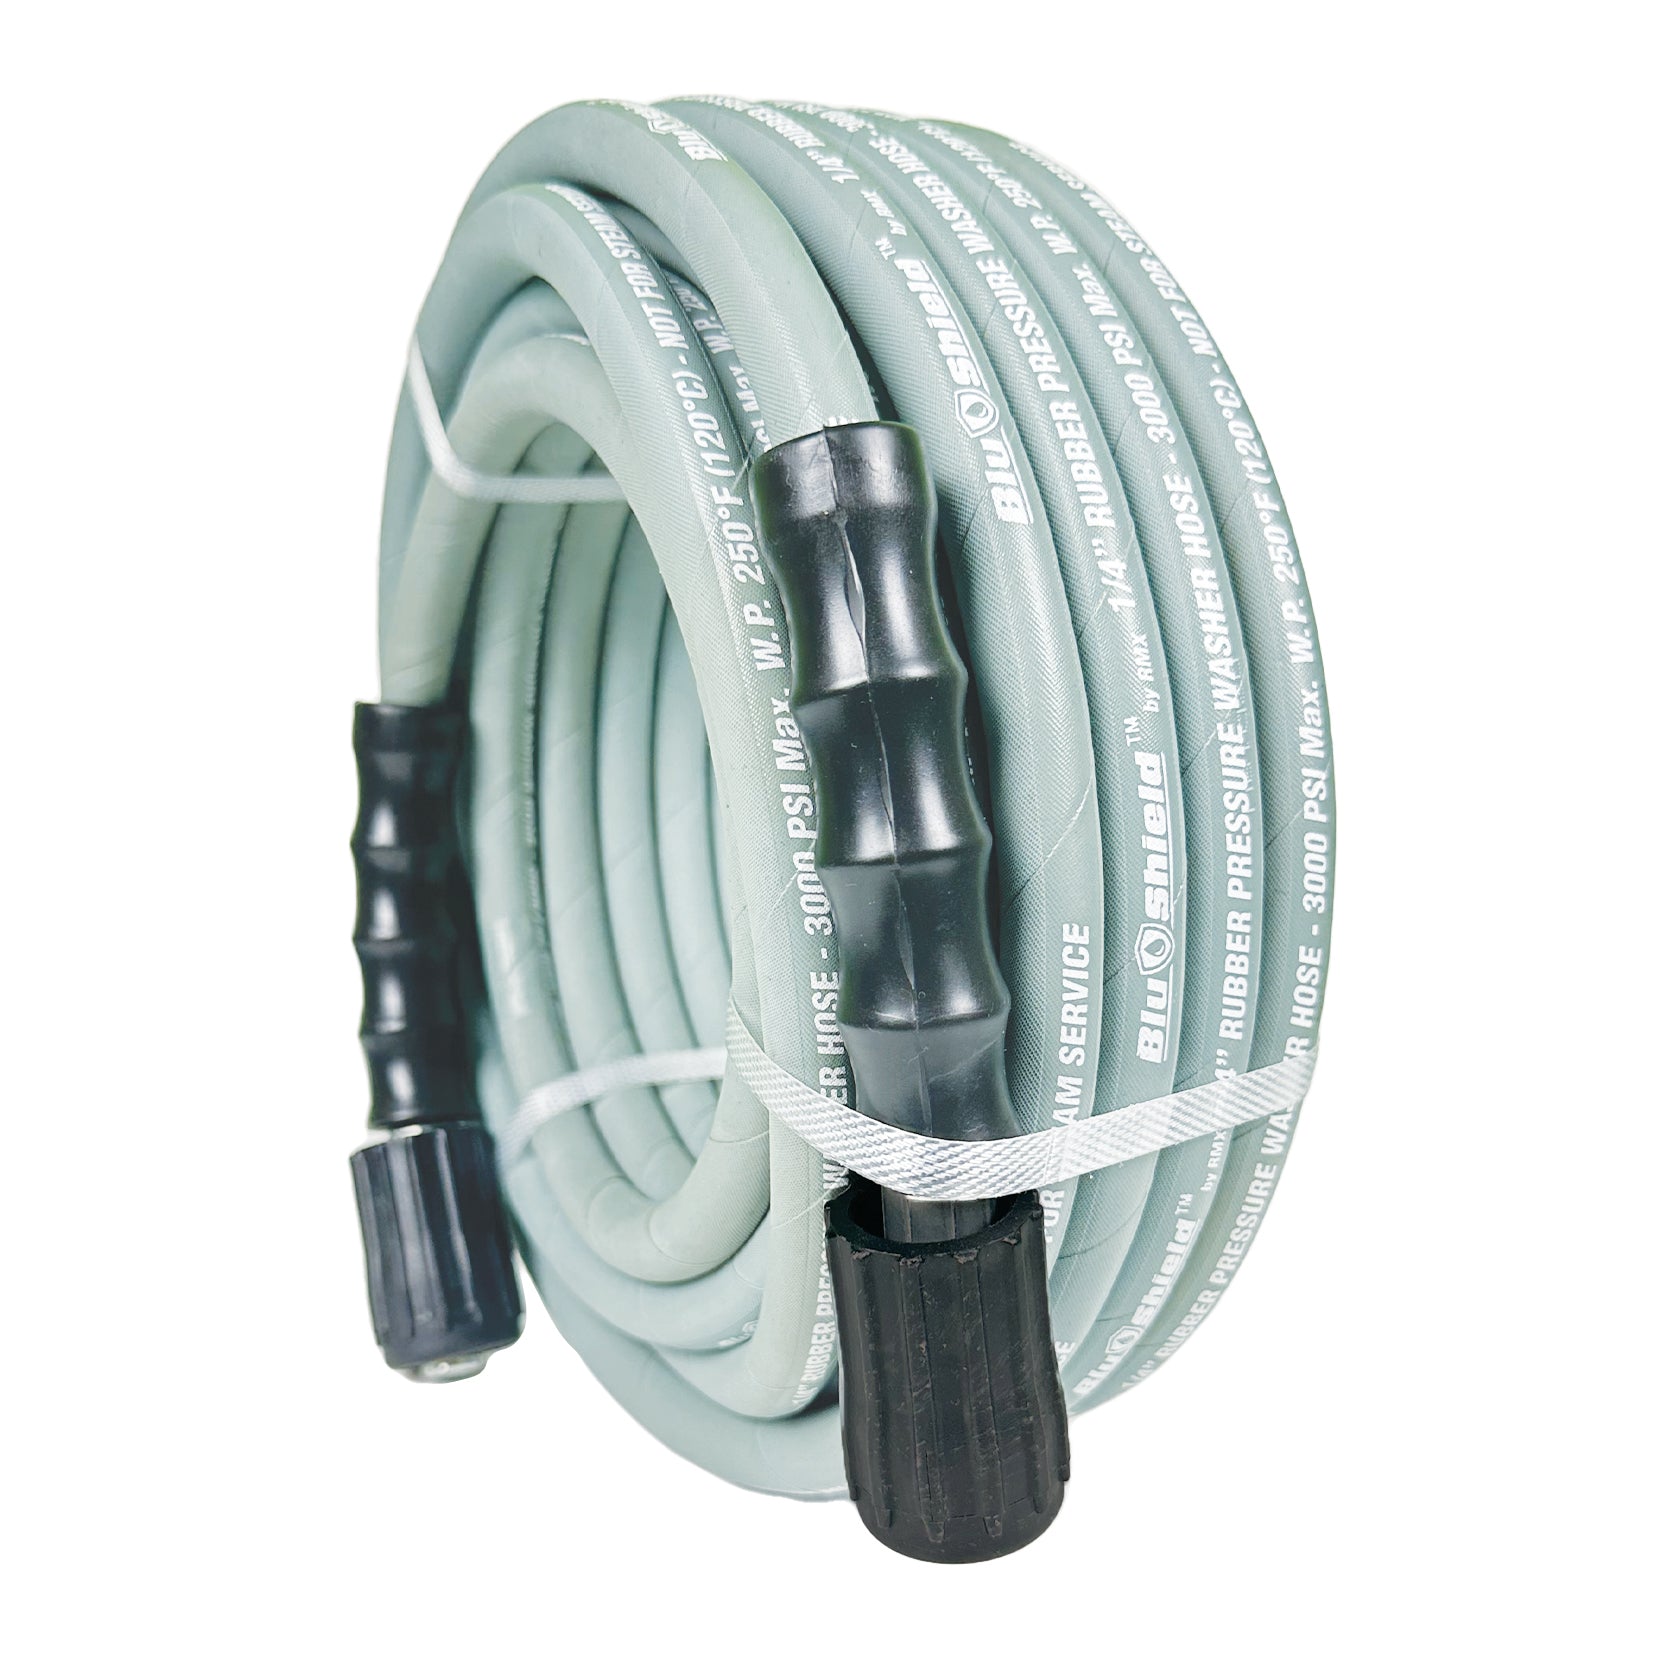 Blushield Pressure Washer Hose Non Marking 1/4" x 50' with M22